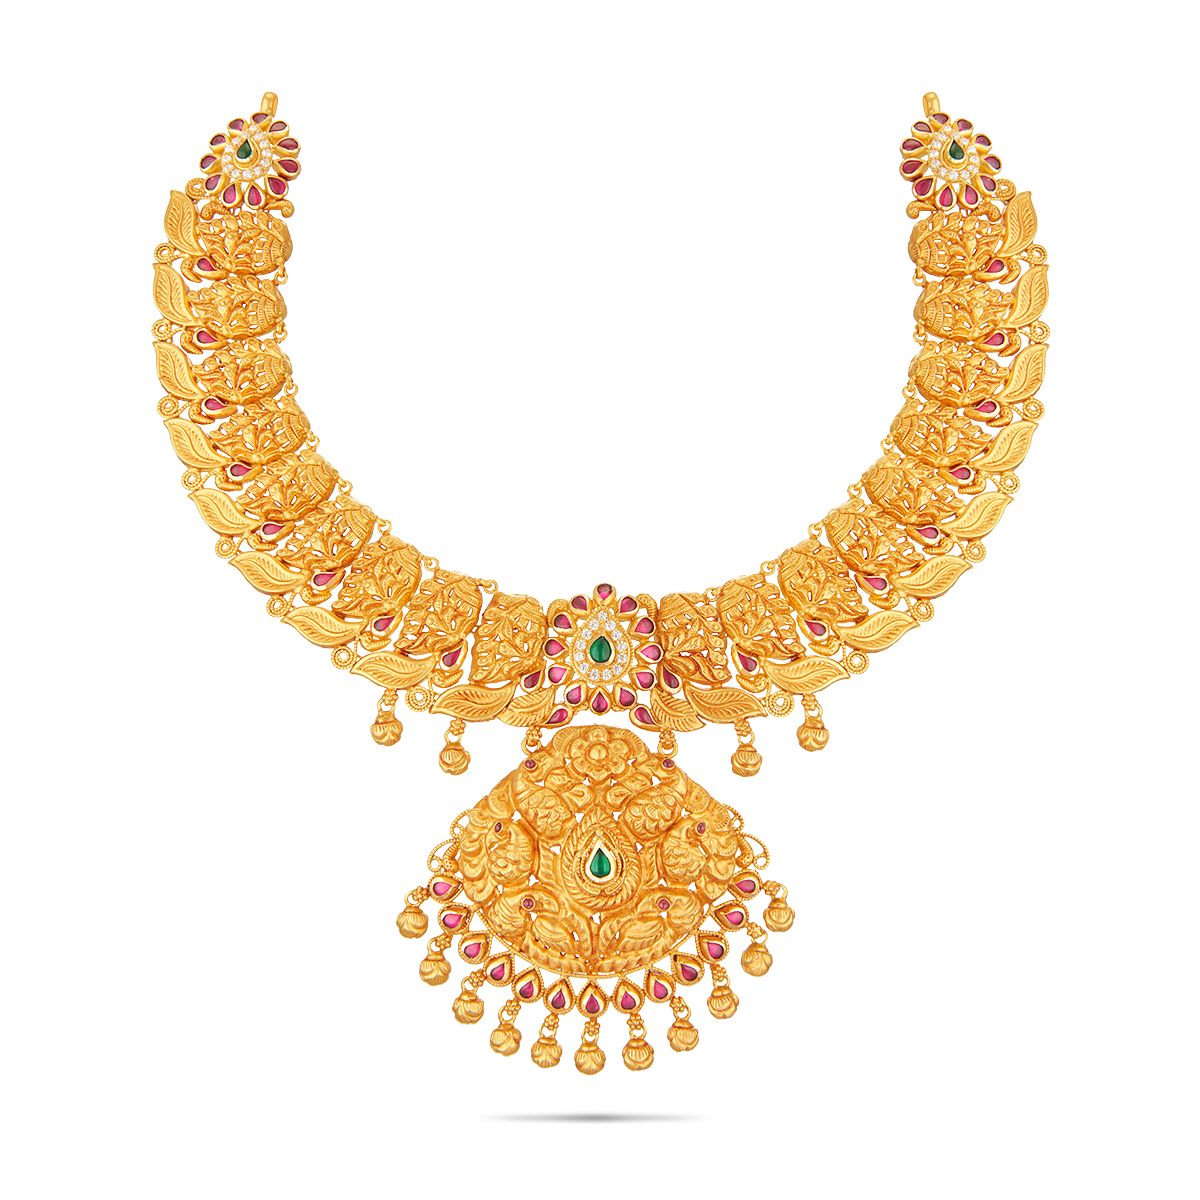 Big Size Net Type Gold Necklace Designs Bridal Collection Buy Online  Shopping NCKN1935